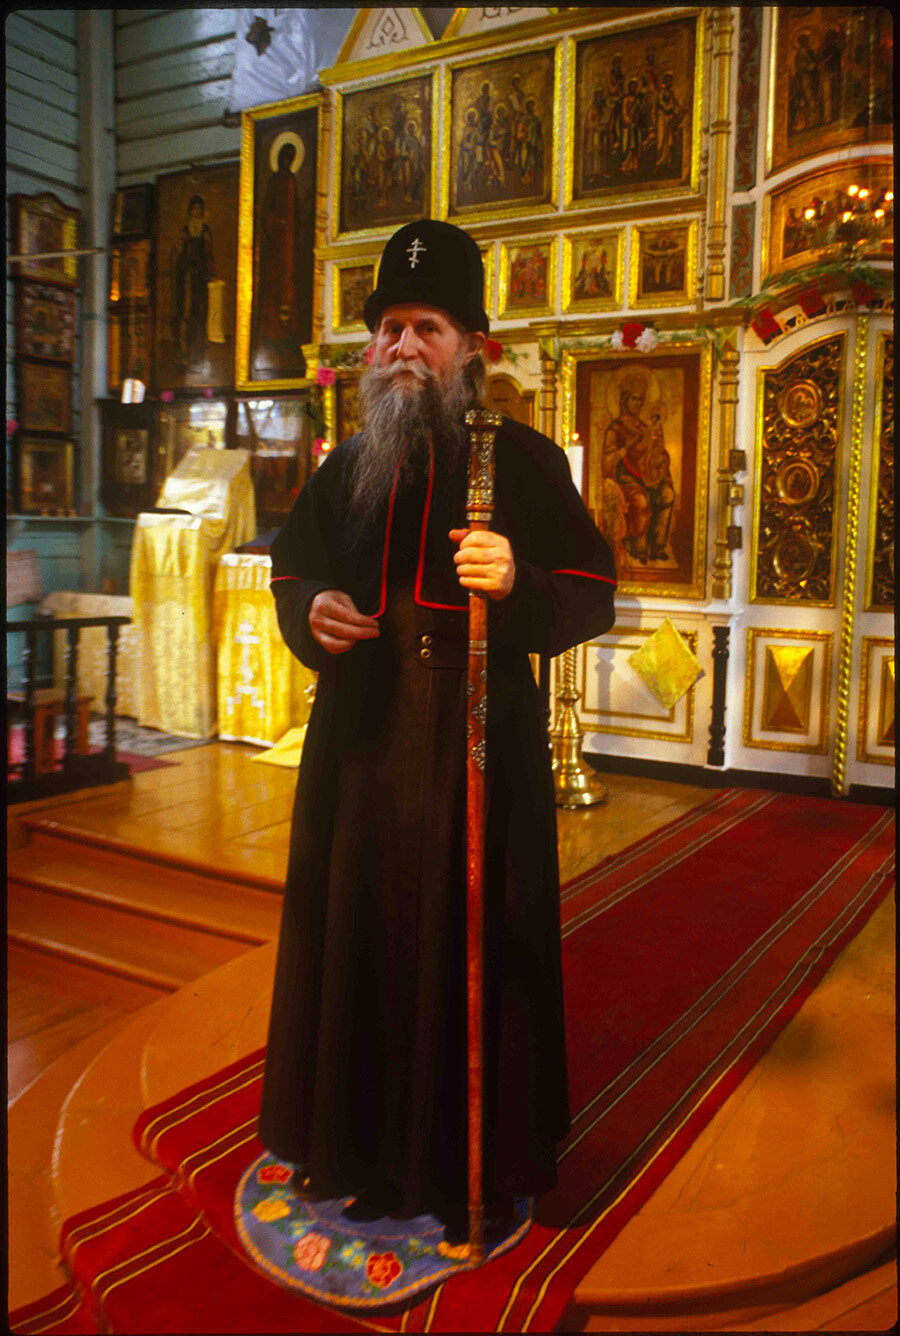 Old Believer Church of the Dormition. Historic photograph of Metropolitan Alimpy (Gusev), spiritual leader of Russian Orthodox Old Believer Church. Photograph taken with the blessing of the prelate, who is standing in front of icon screen. September 27, 1999